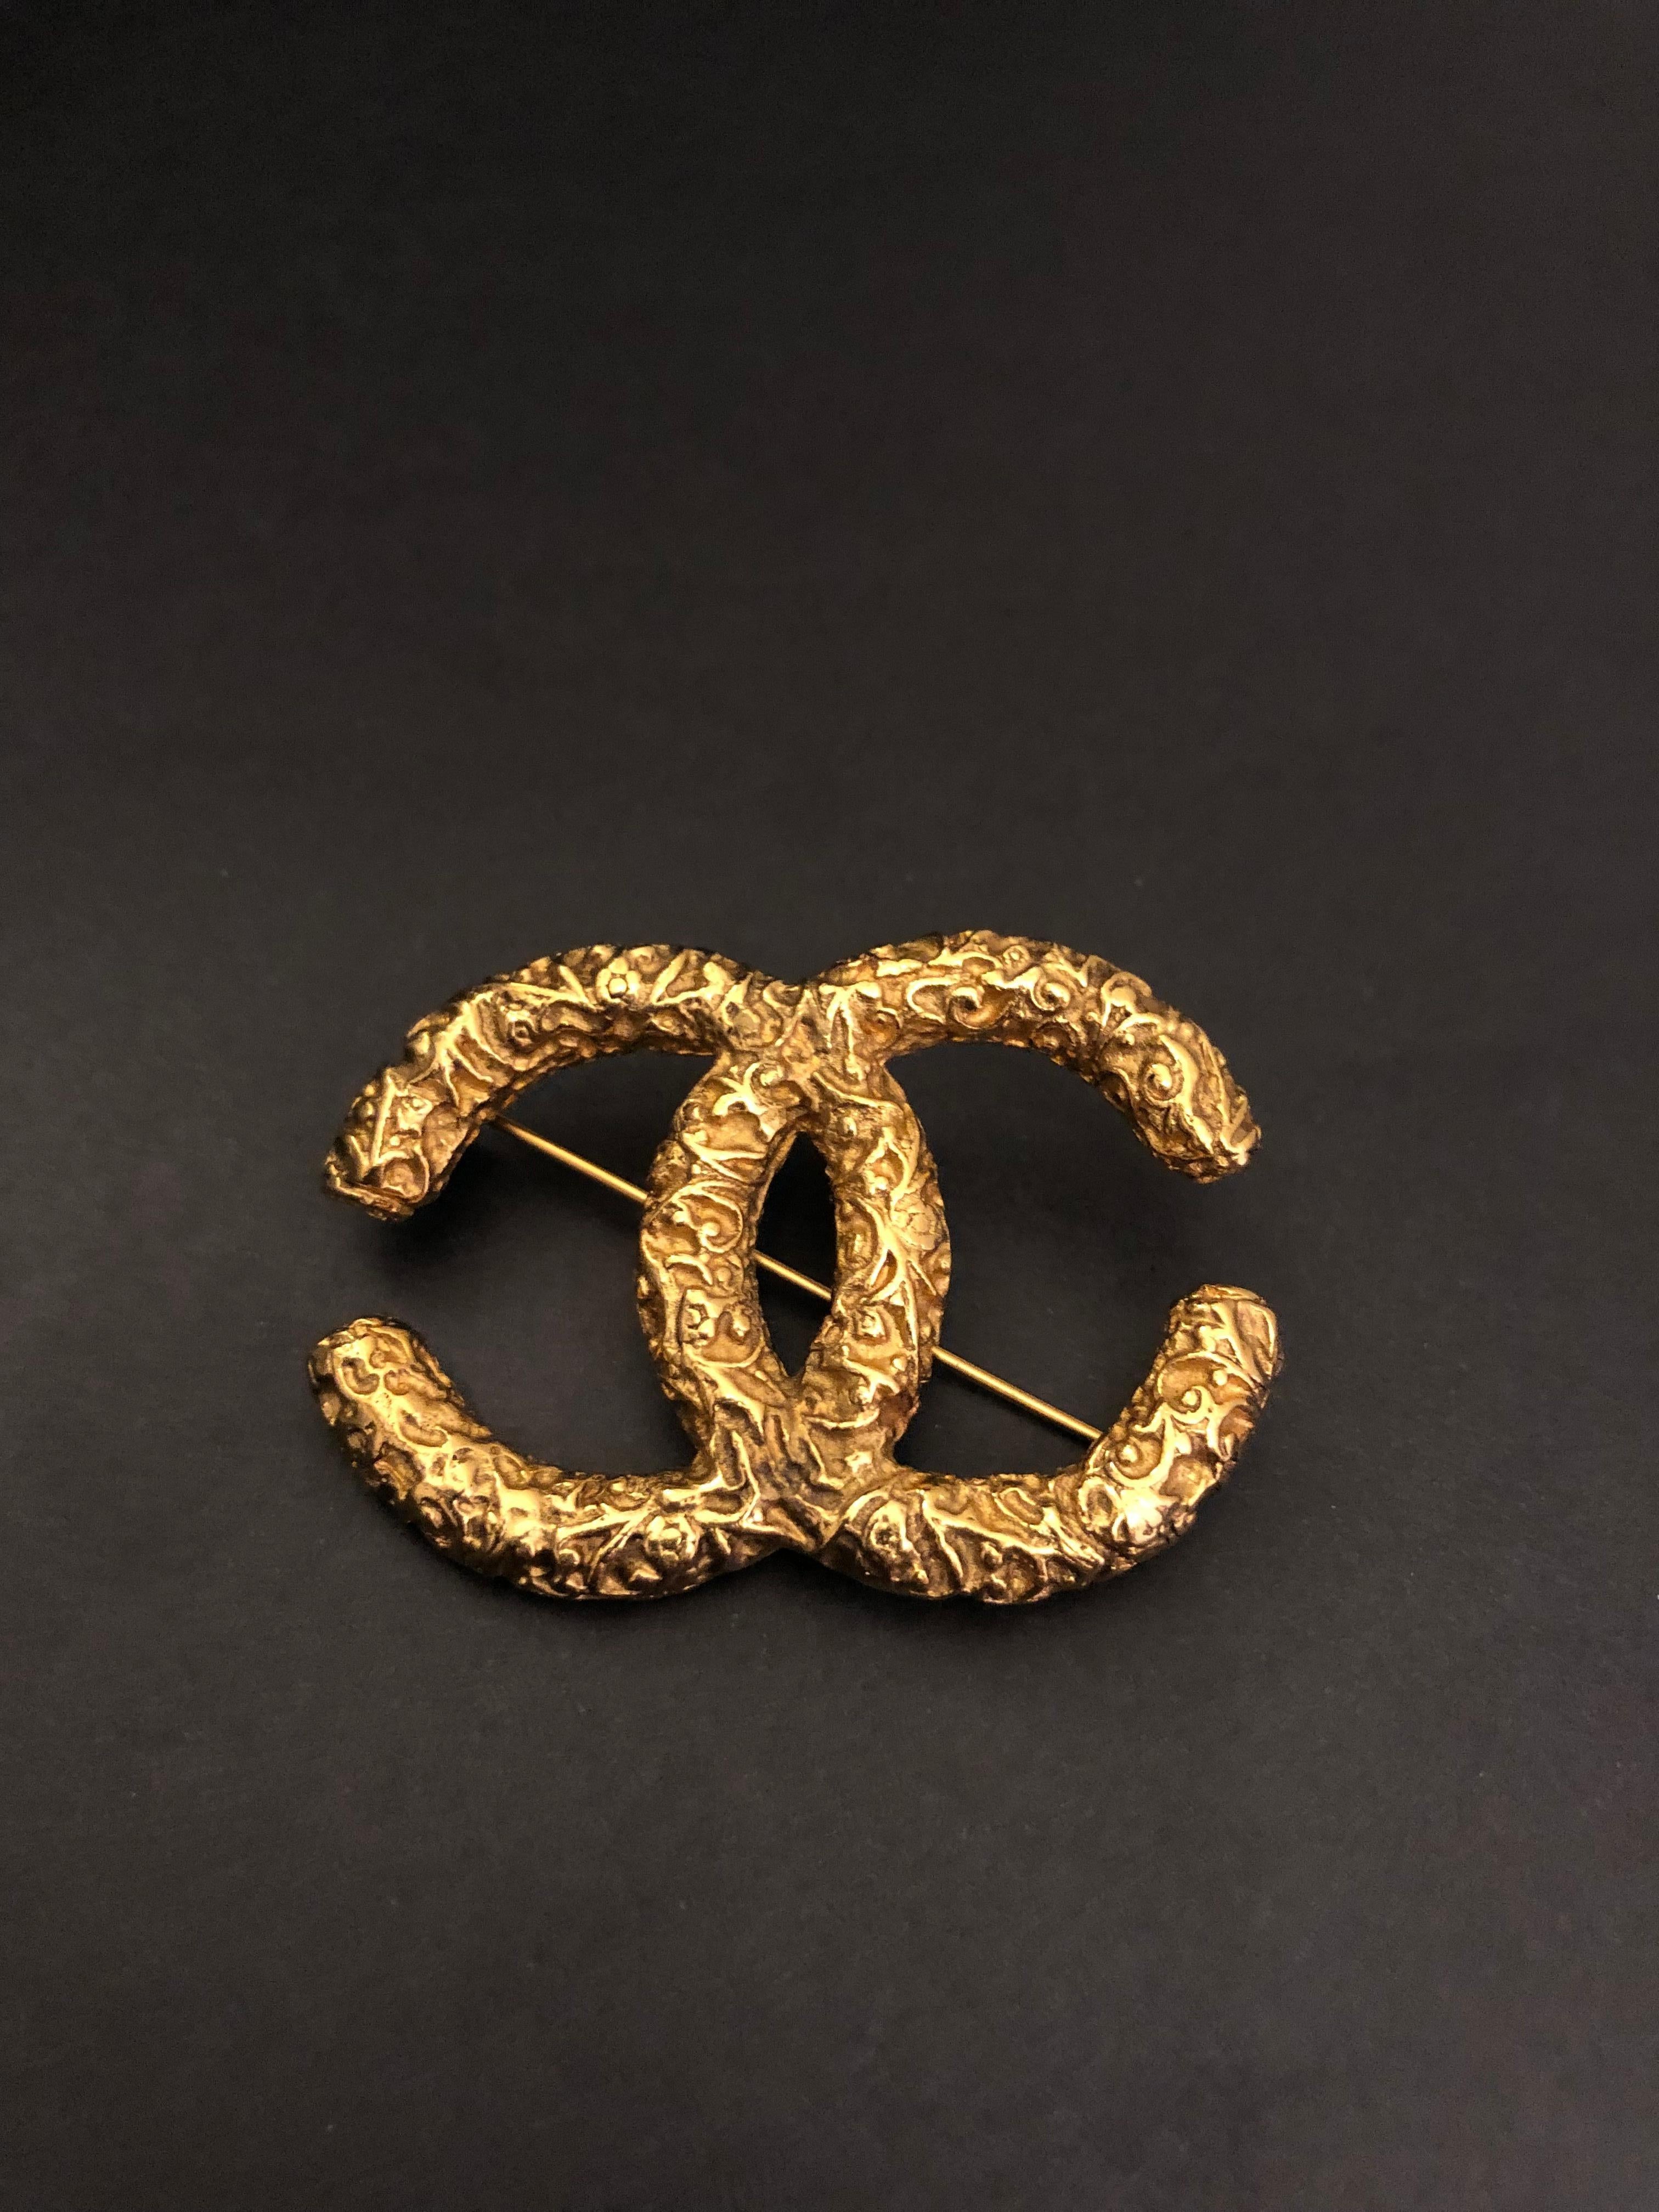 1993 CHANEL gold toned chain in floral textured intertwined CC motif. Stamped 93A made in France. Measures approximately 5.1 x 3.6 cm. Comes with box. 

Condition: Minor marks on the back. Generally in very good condition.